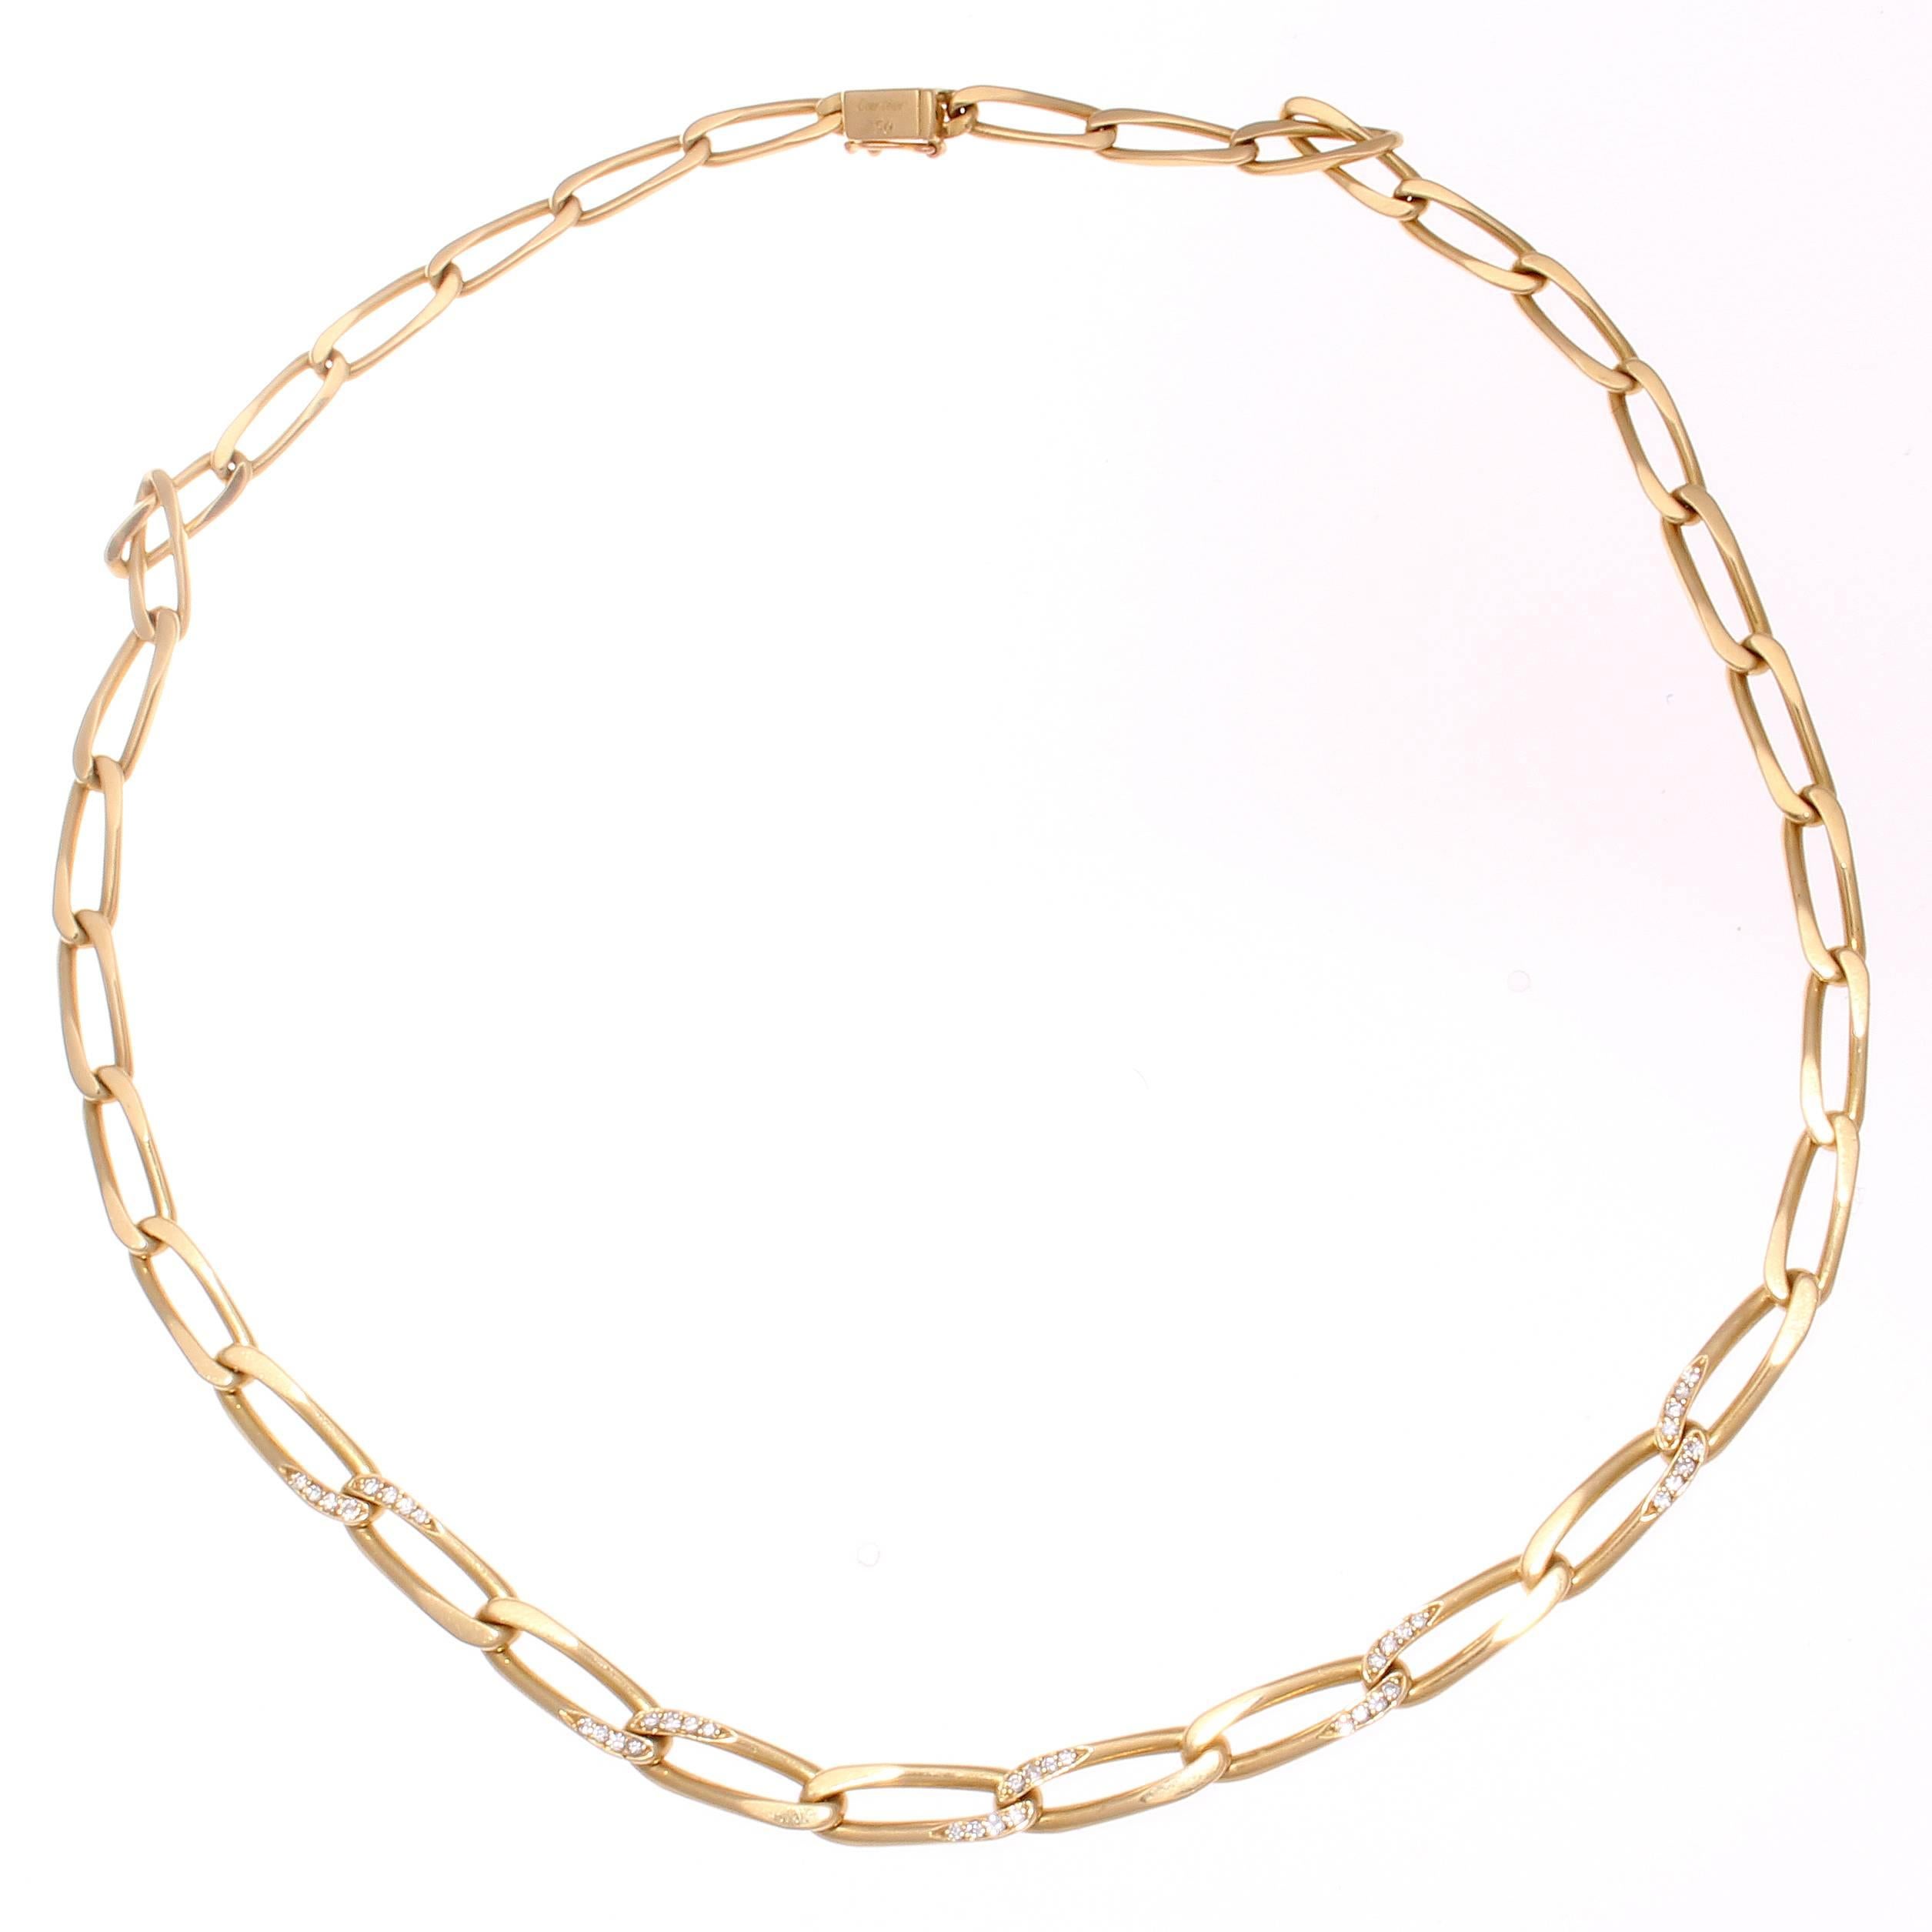 The true elegance from Cartier is subtly portrayed through the gently interlocking links of gold that are thoughtfully designed with white, clean diamonds. Crafted in 18k yellow gold. Signed Cartier and numbered.